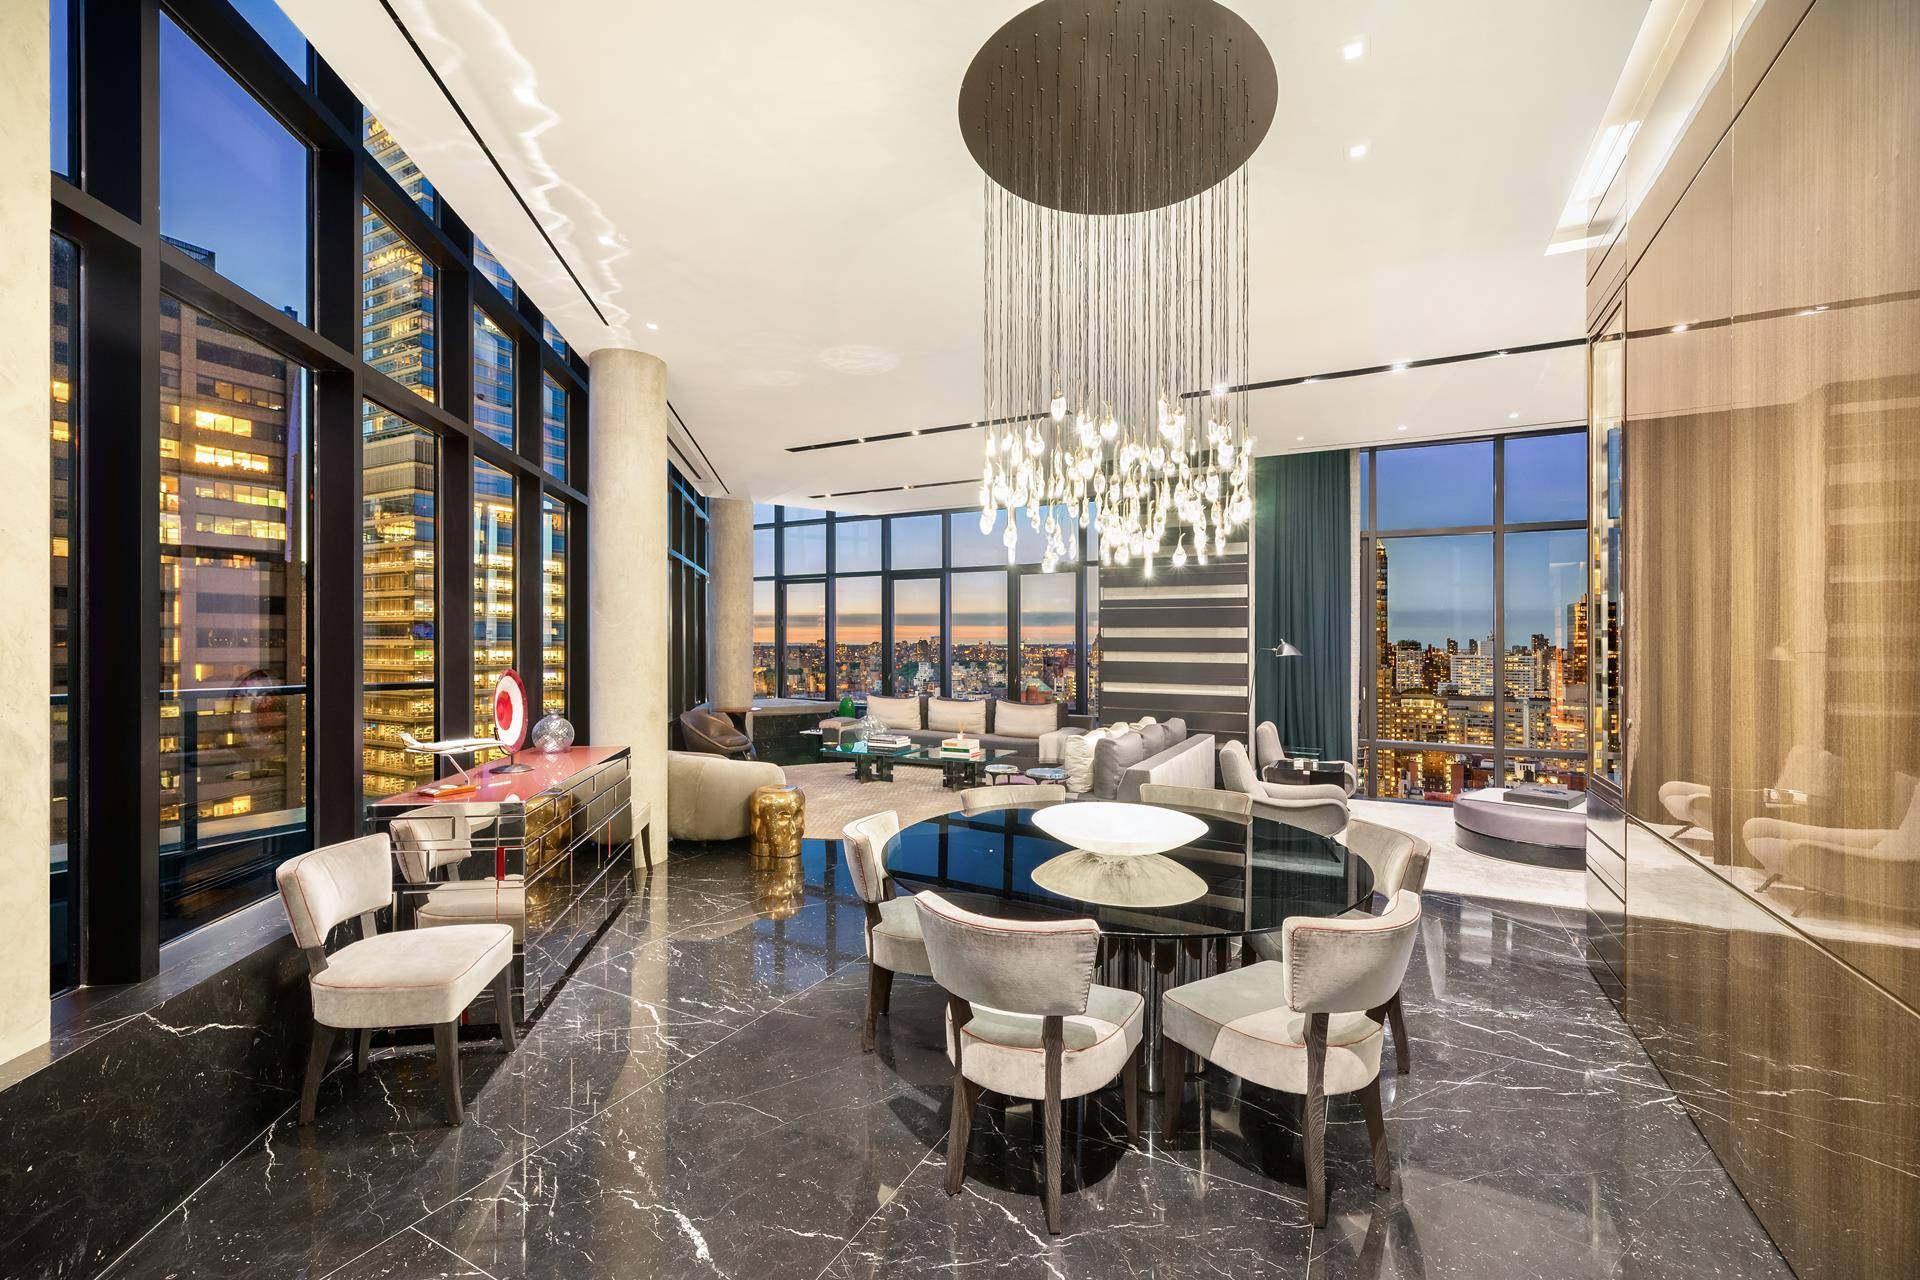 A one of a kind penthouse that is impeccably designed with ultra luxury finishes and the highest end custom furnishings is available now at an incredible price.